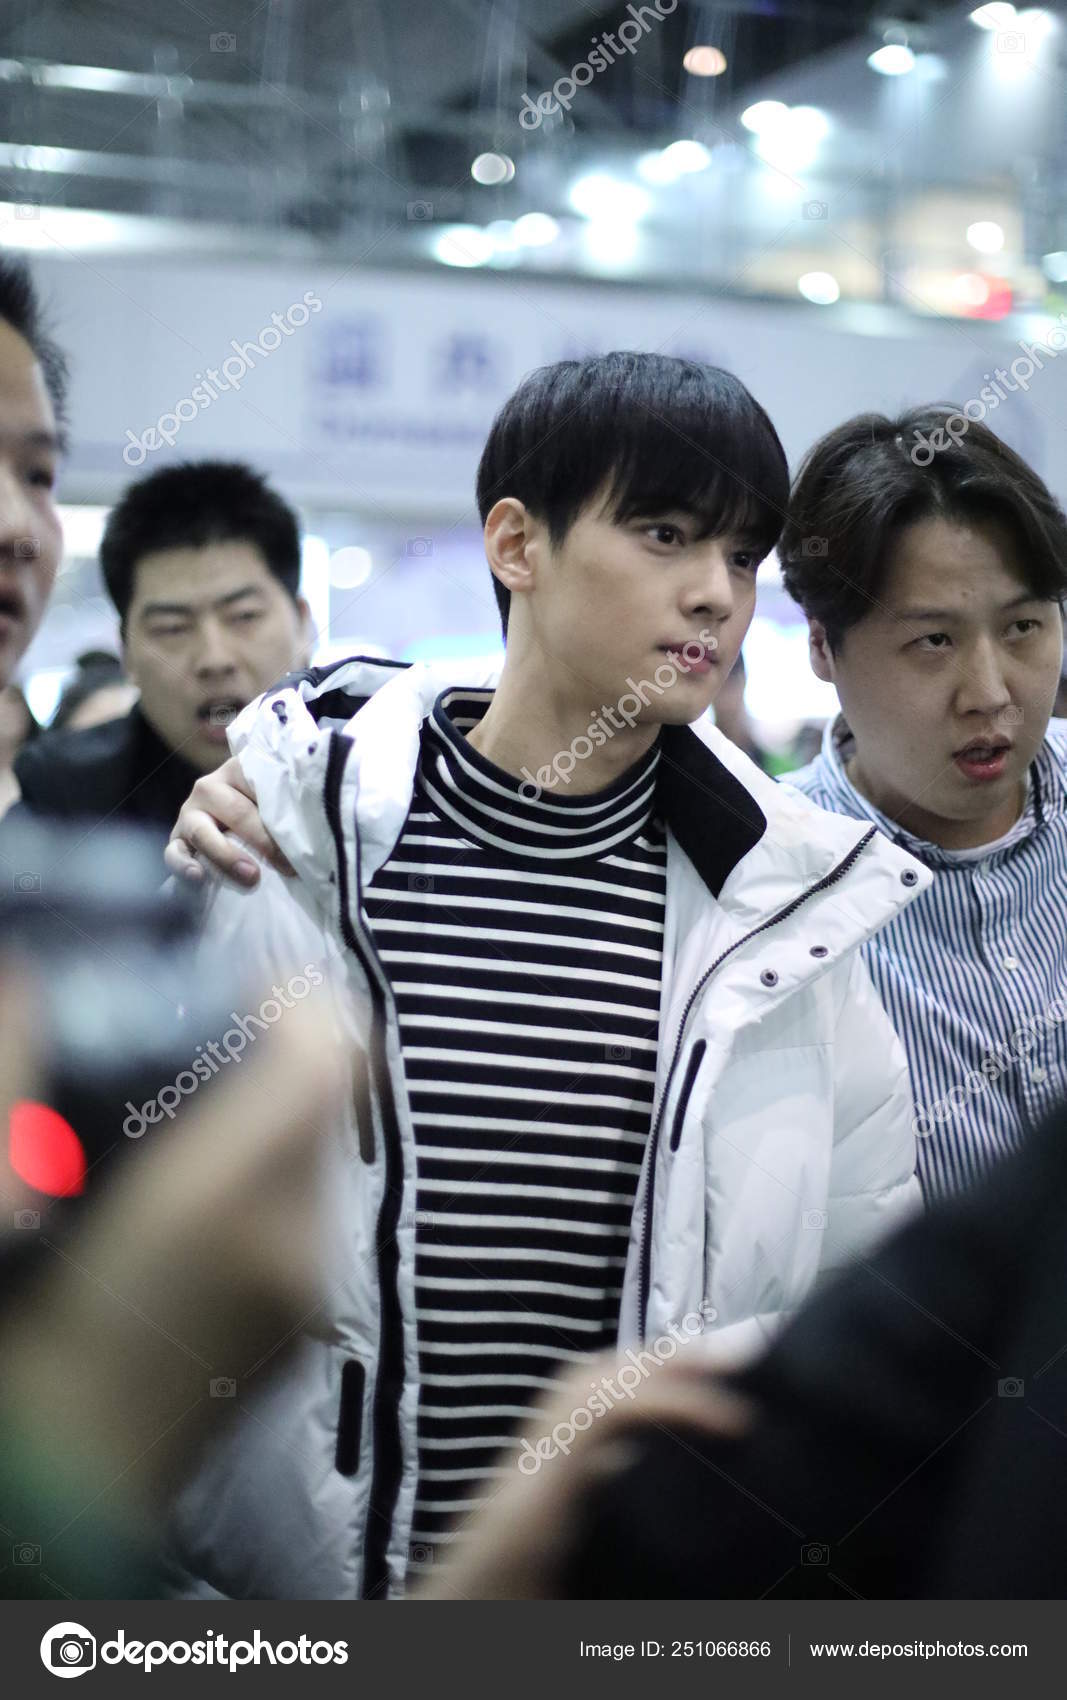 Actor Dylan Wang Hedi is seen at an airport on November 17, 2018